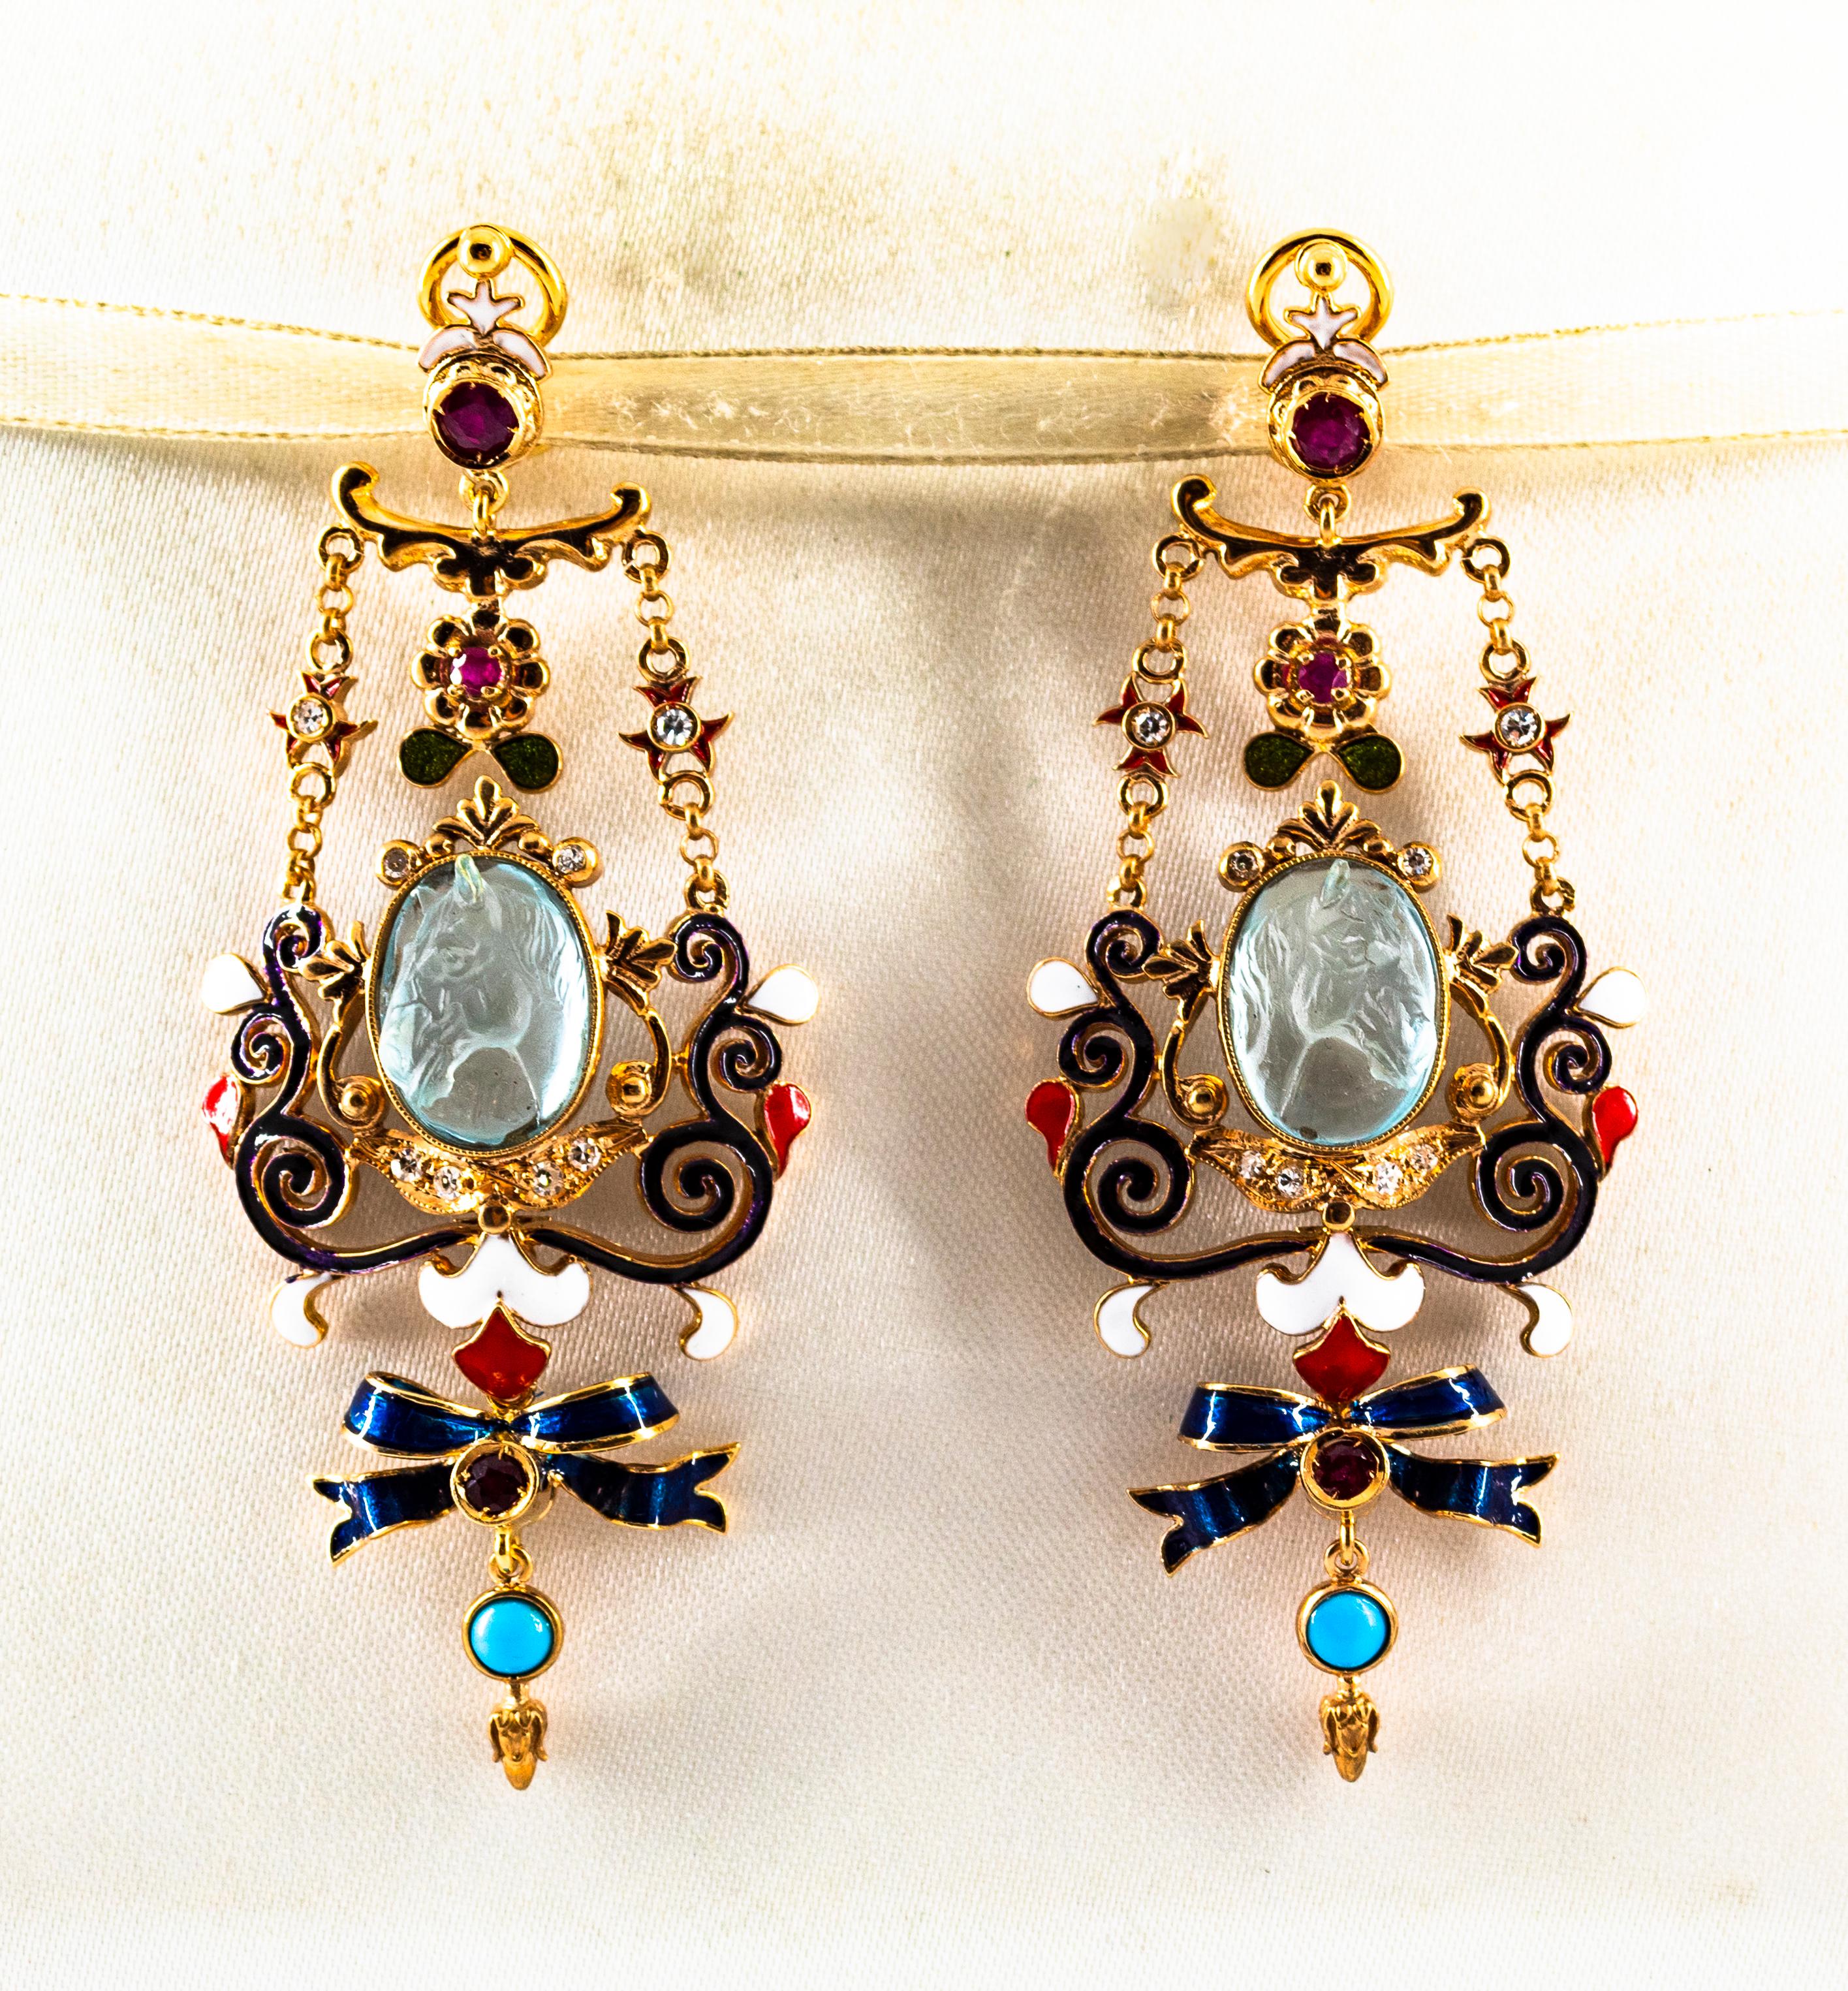 These Earrings are made of 9K Yellow Gold.
These Earrings have  0.30 Carats of White Modern Round Cut Diamonds.
These Earrings have 0.60 Carats of Rubies.
These Earrings have two Carved Blue Topaz representing two horses.
These Earrings have